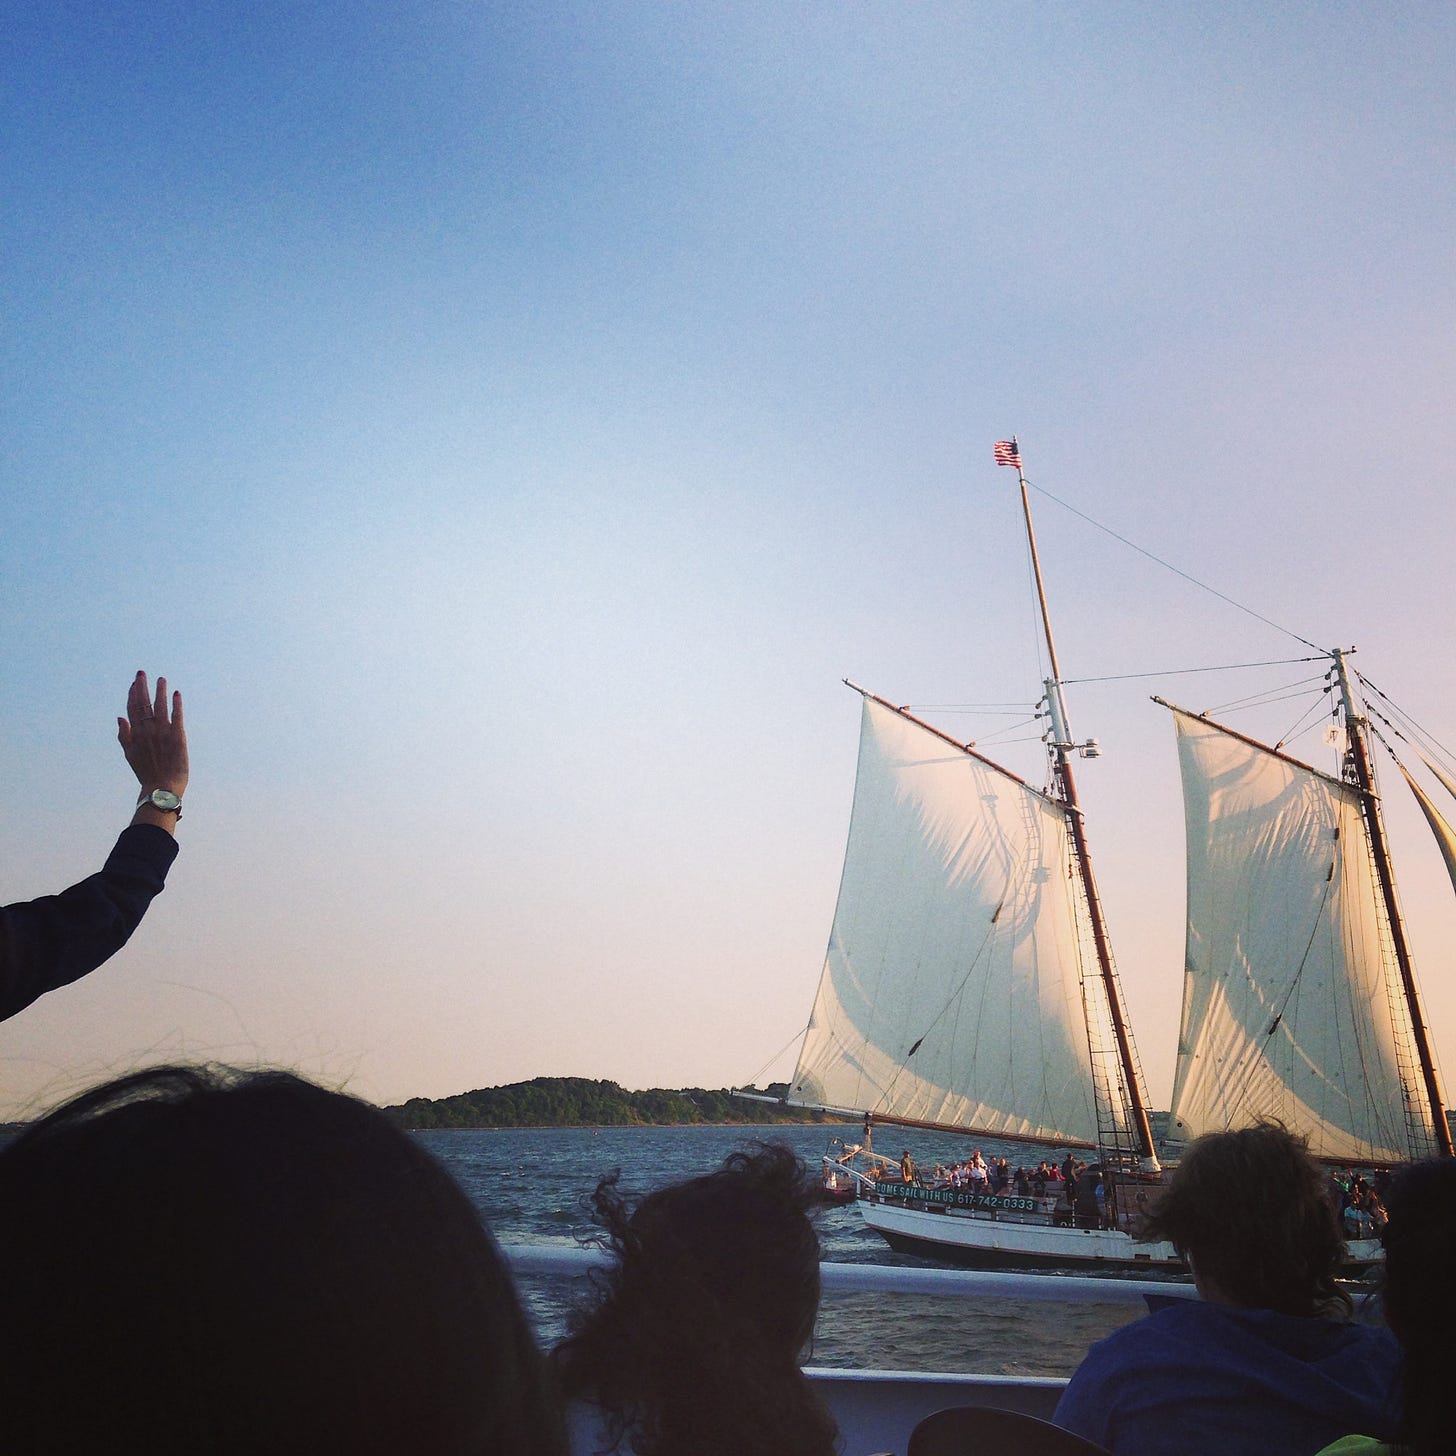 A person waving just out of frame at a large tall ship